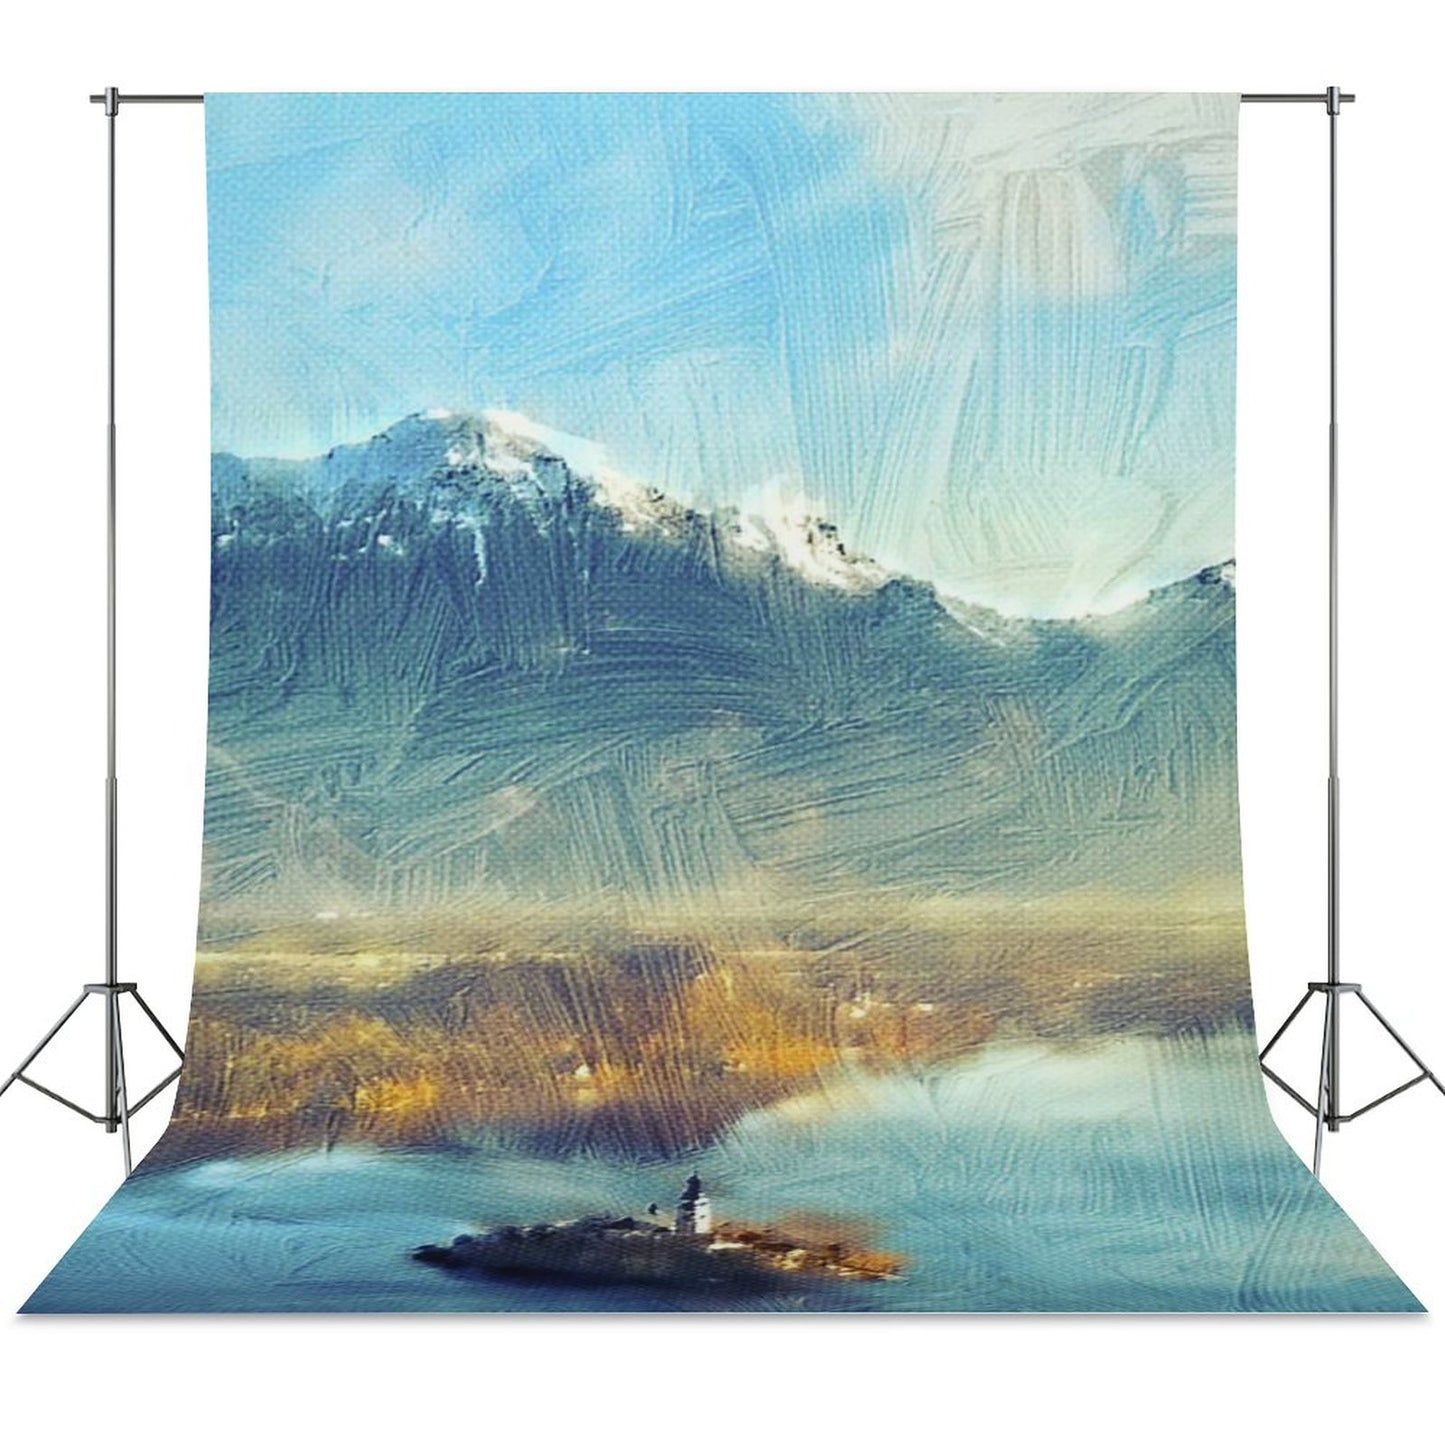 Online DIY Photography Cloth Ink Painting Town Seaside